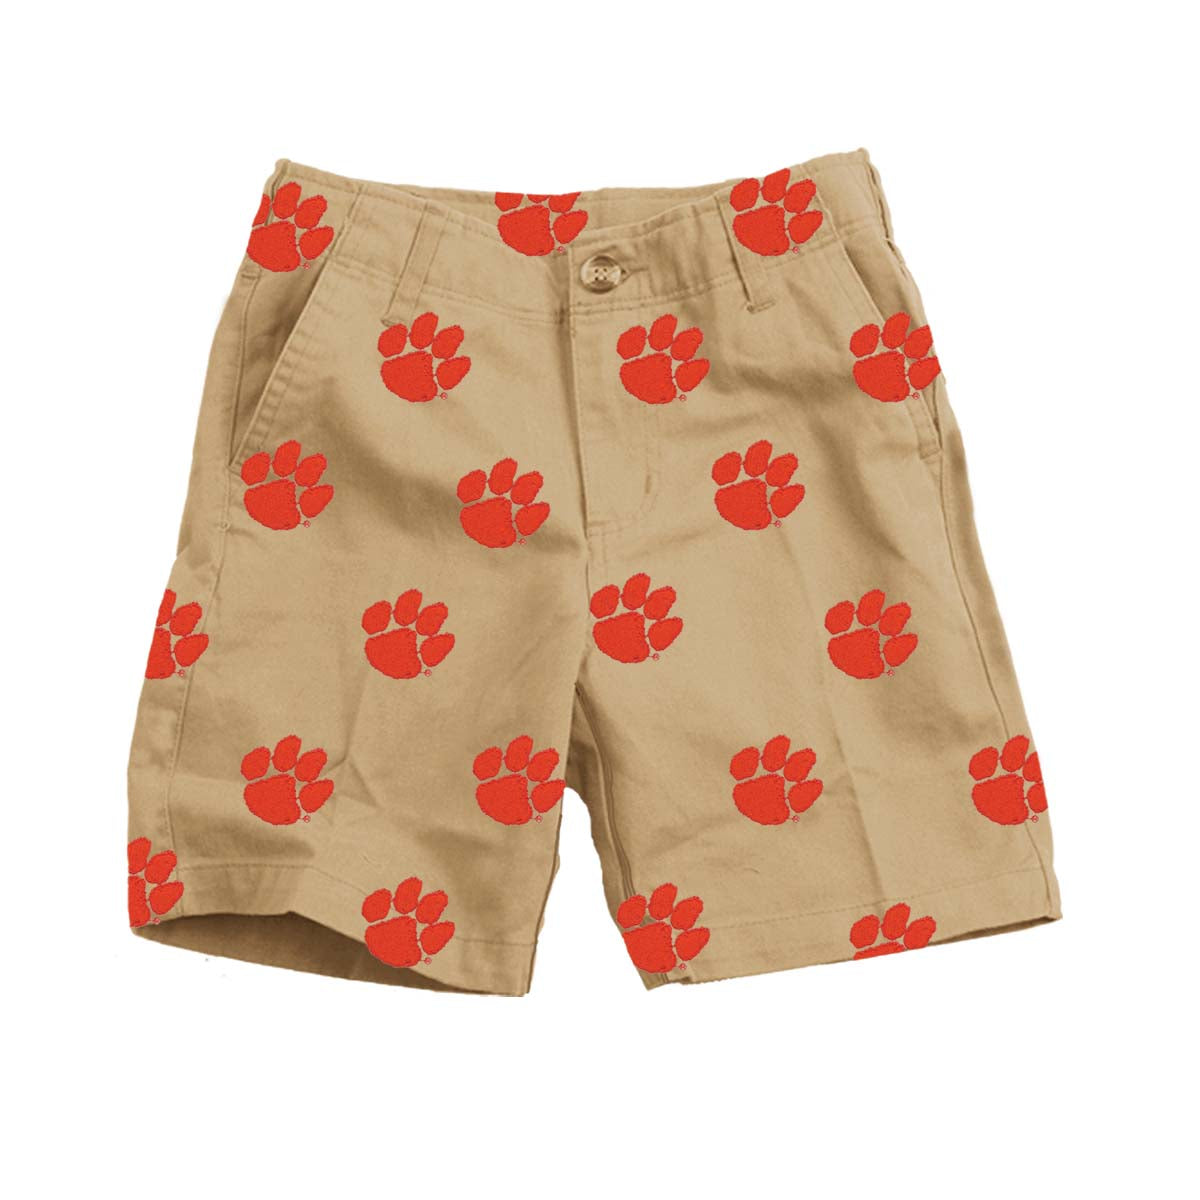 Wes & Willy Clemson Tigers Boy's Embroidered Twill Short